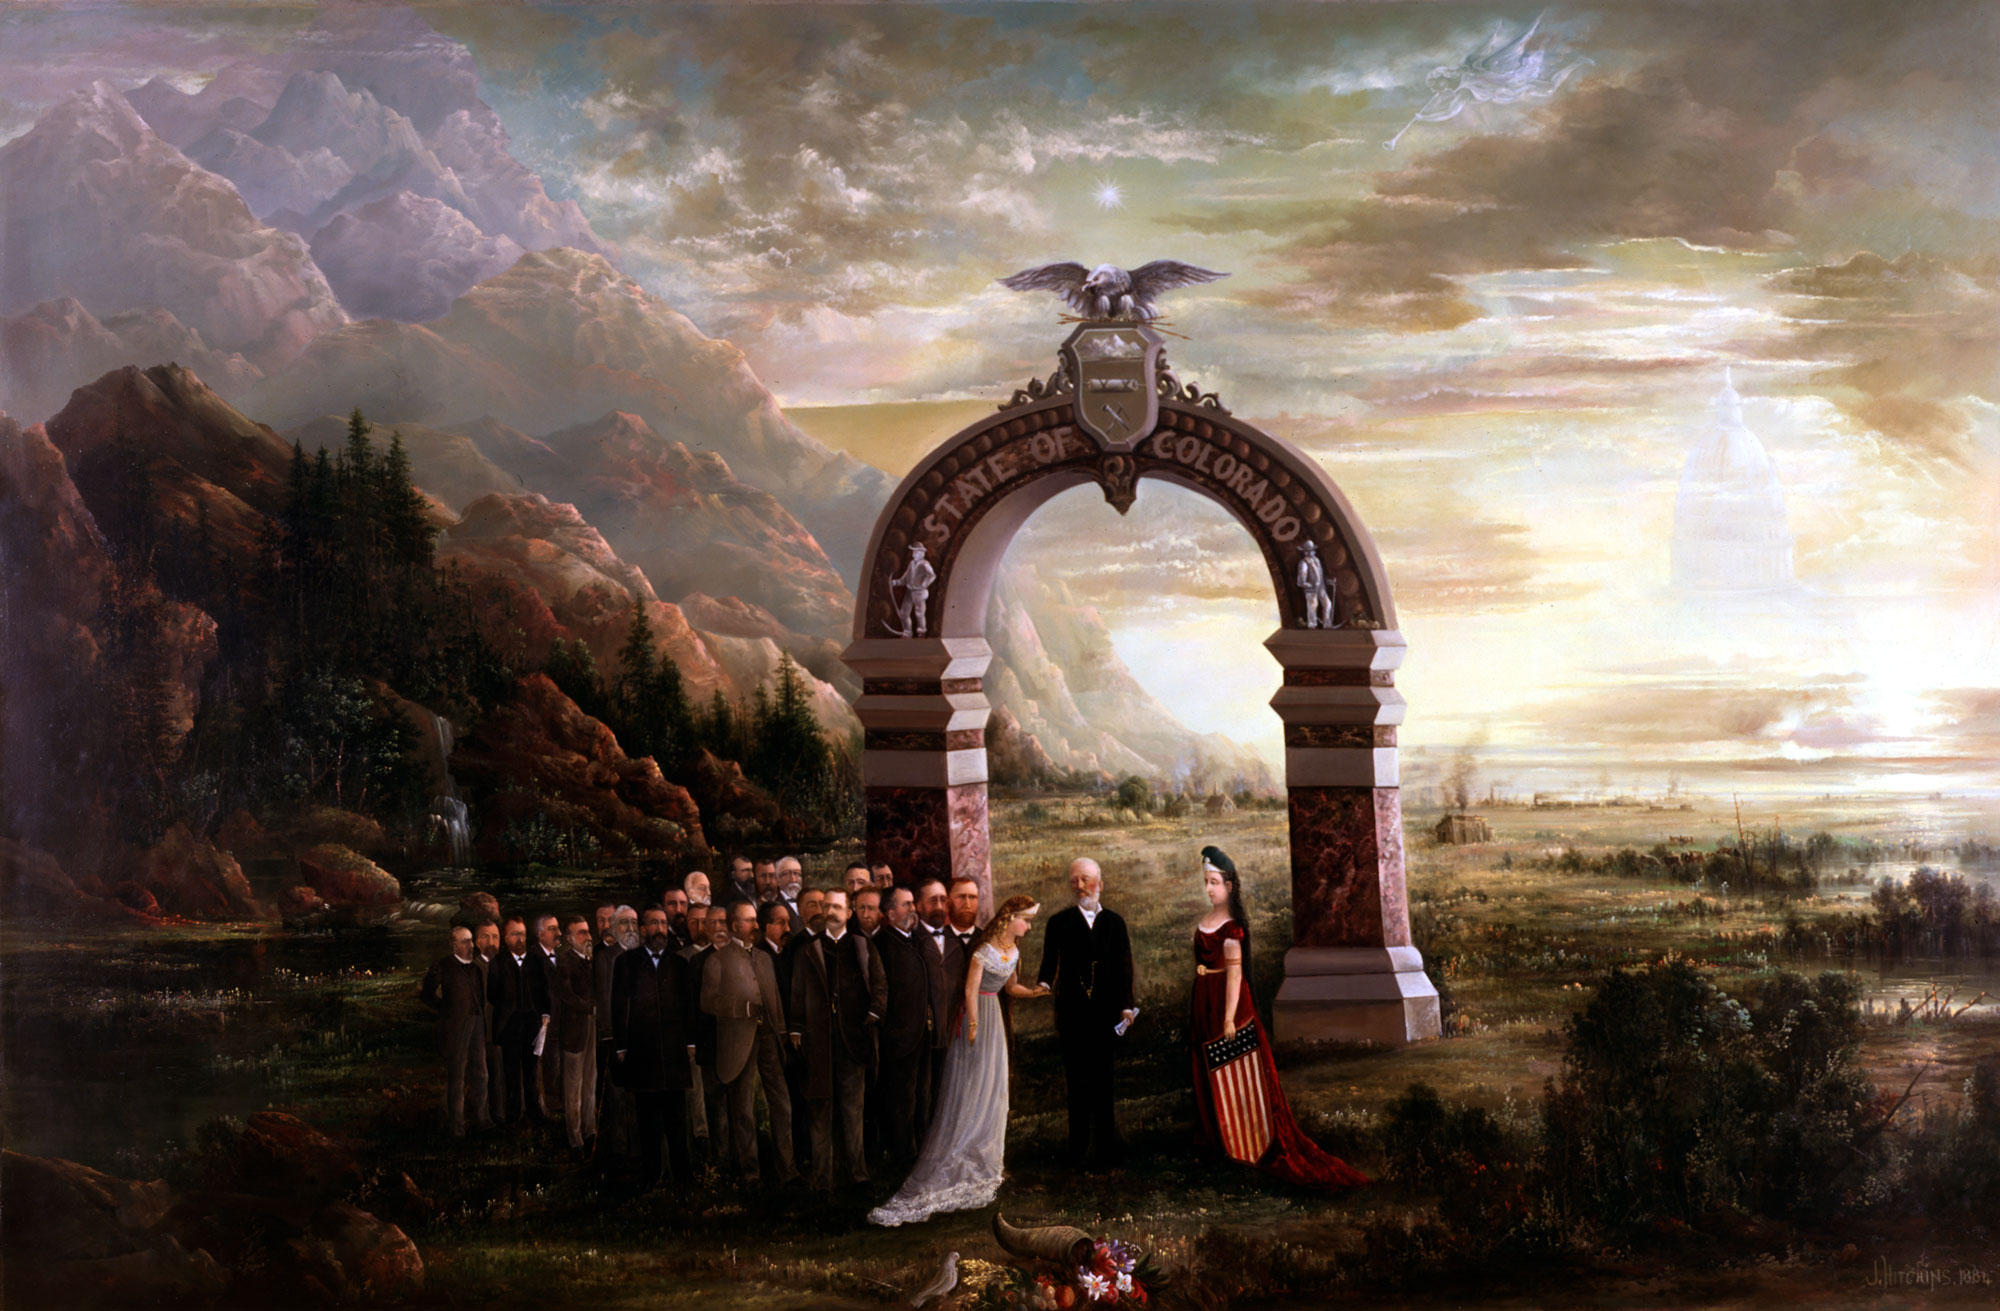 Painting "ADMISSION OF COLORADO TO THE UNION"